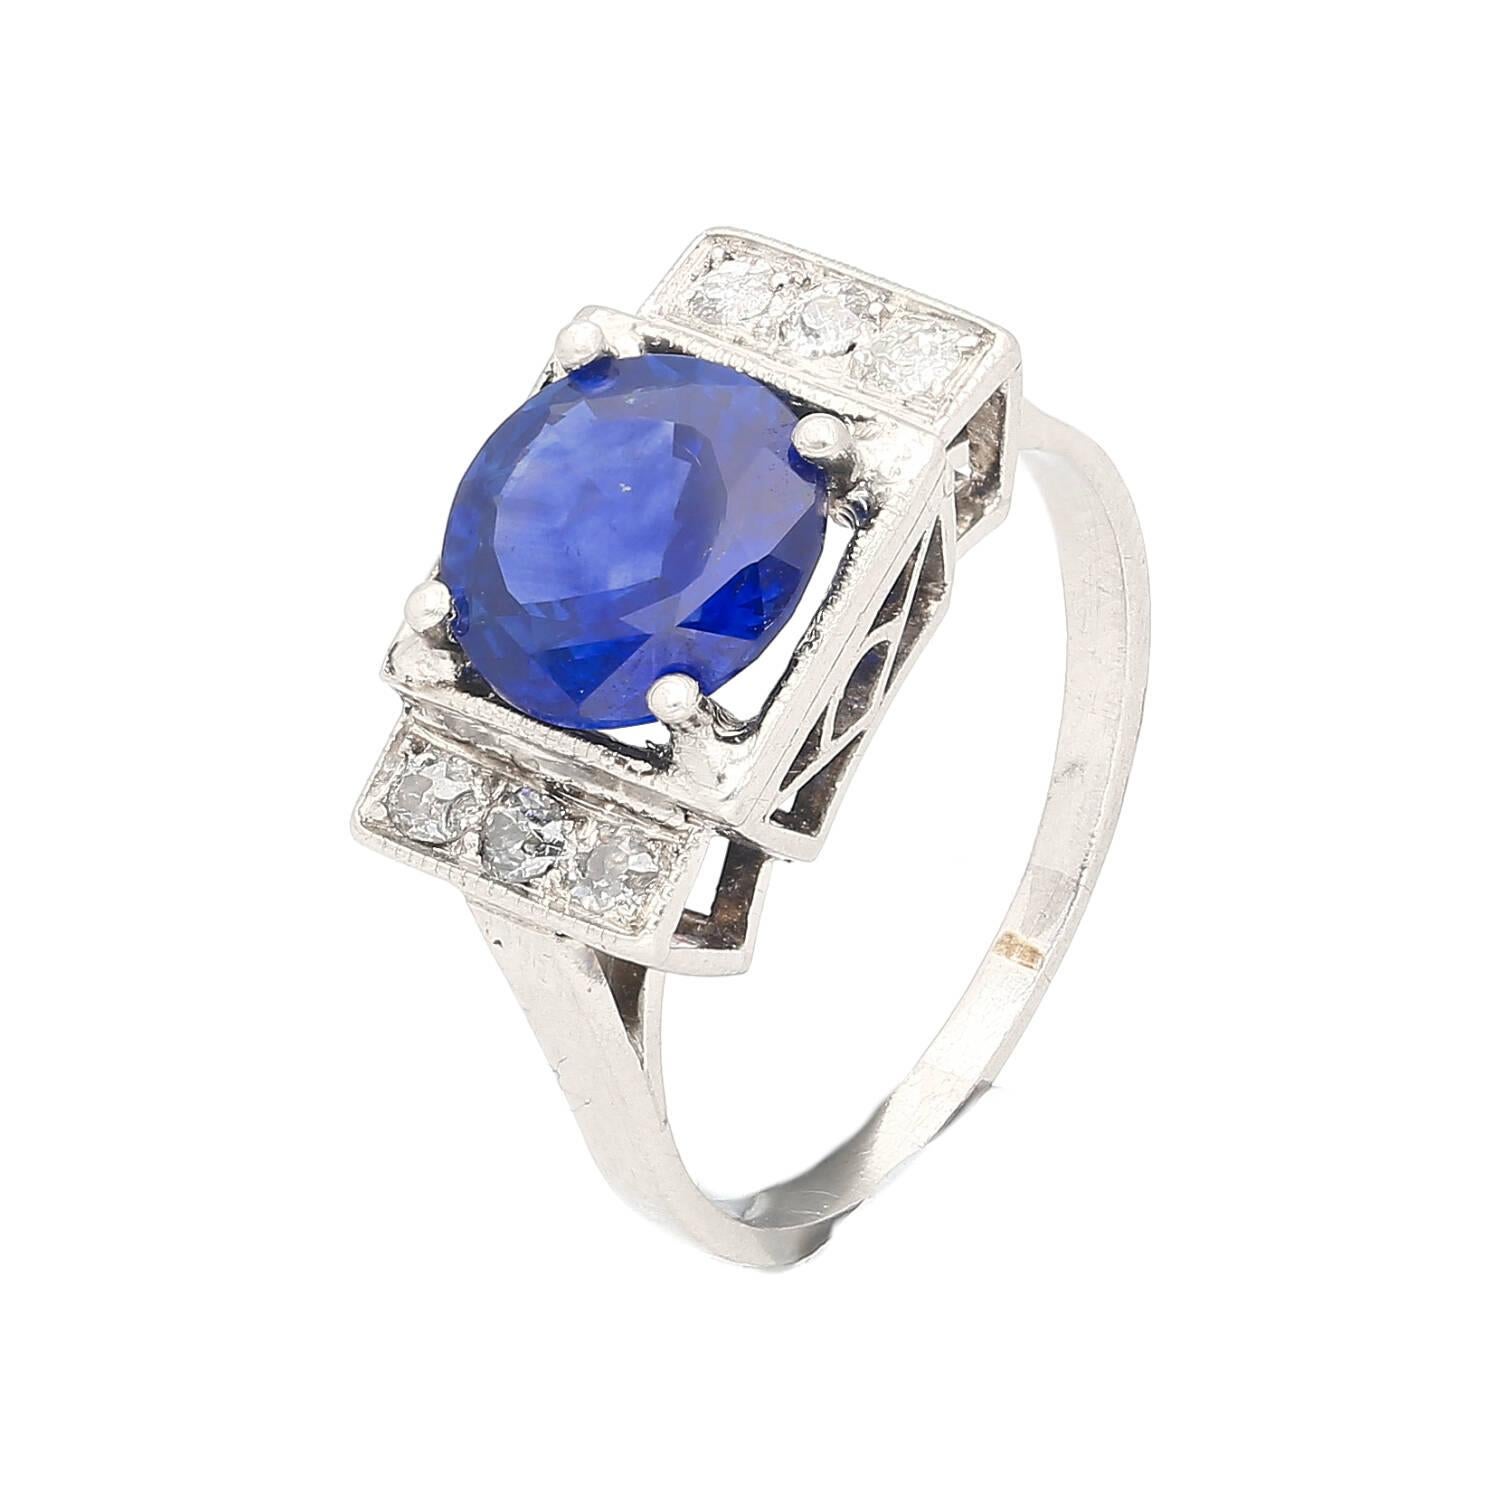 GRS Certified 2.47 Carat No Heat Royal Blue Sapphire & Diamond Platinum Ring In Excellent Condition For Sale In Miami, FL